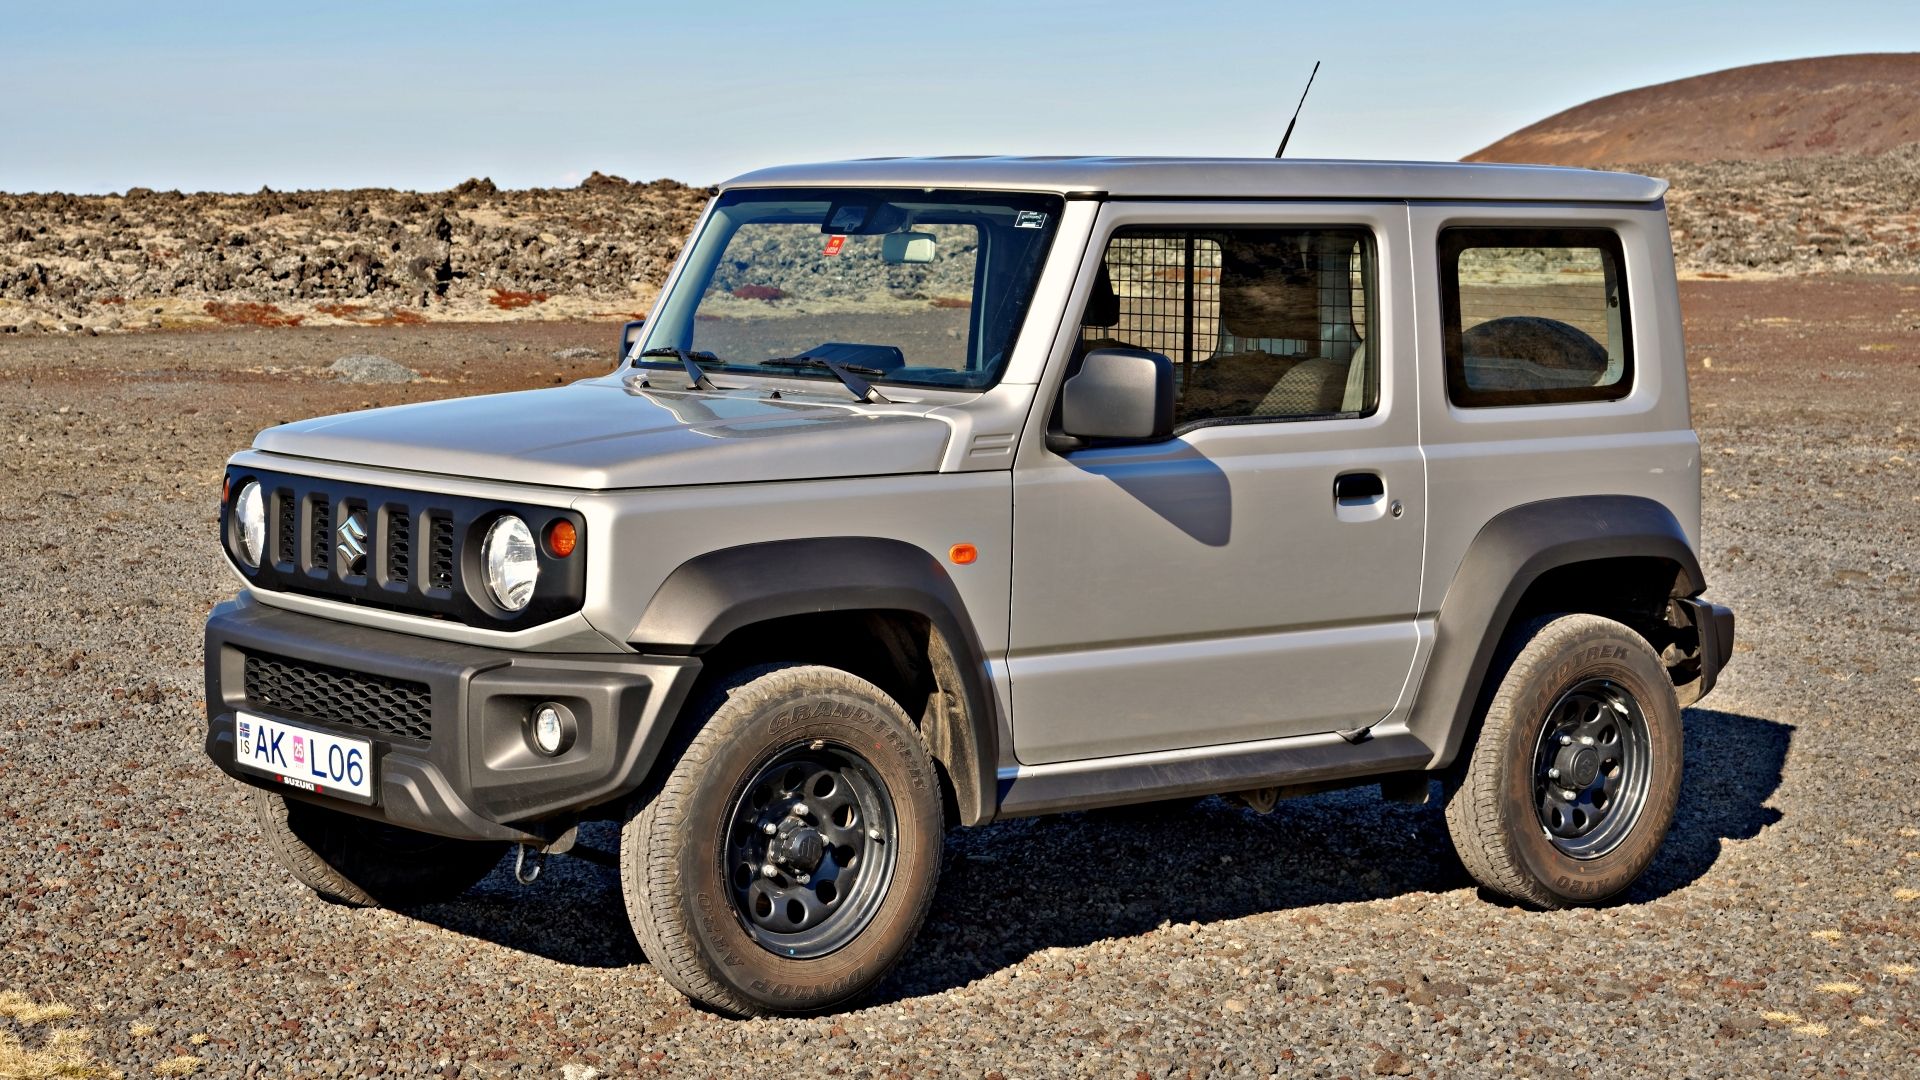 The Real Reason Why We Can't Have The Suzuki Jimny In the U.S.